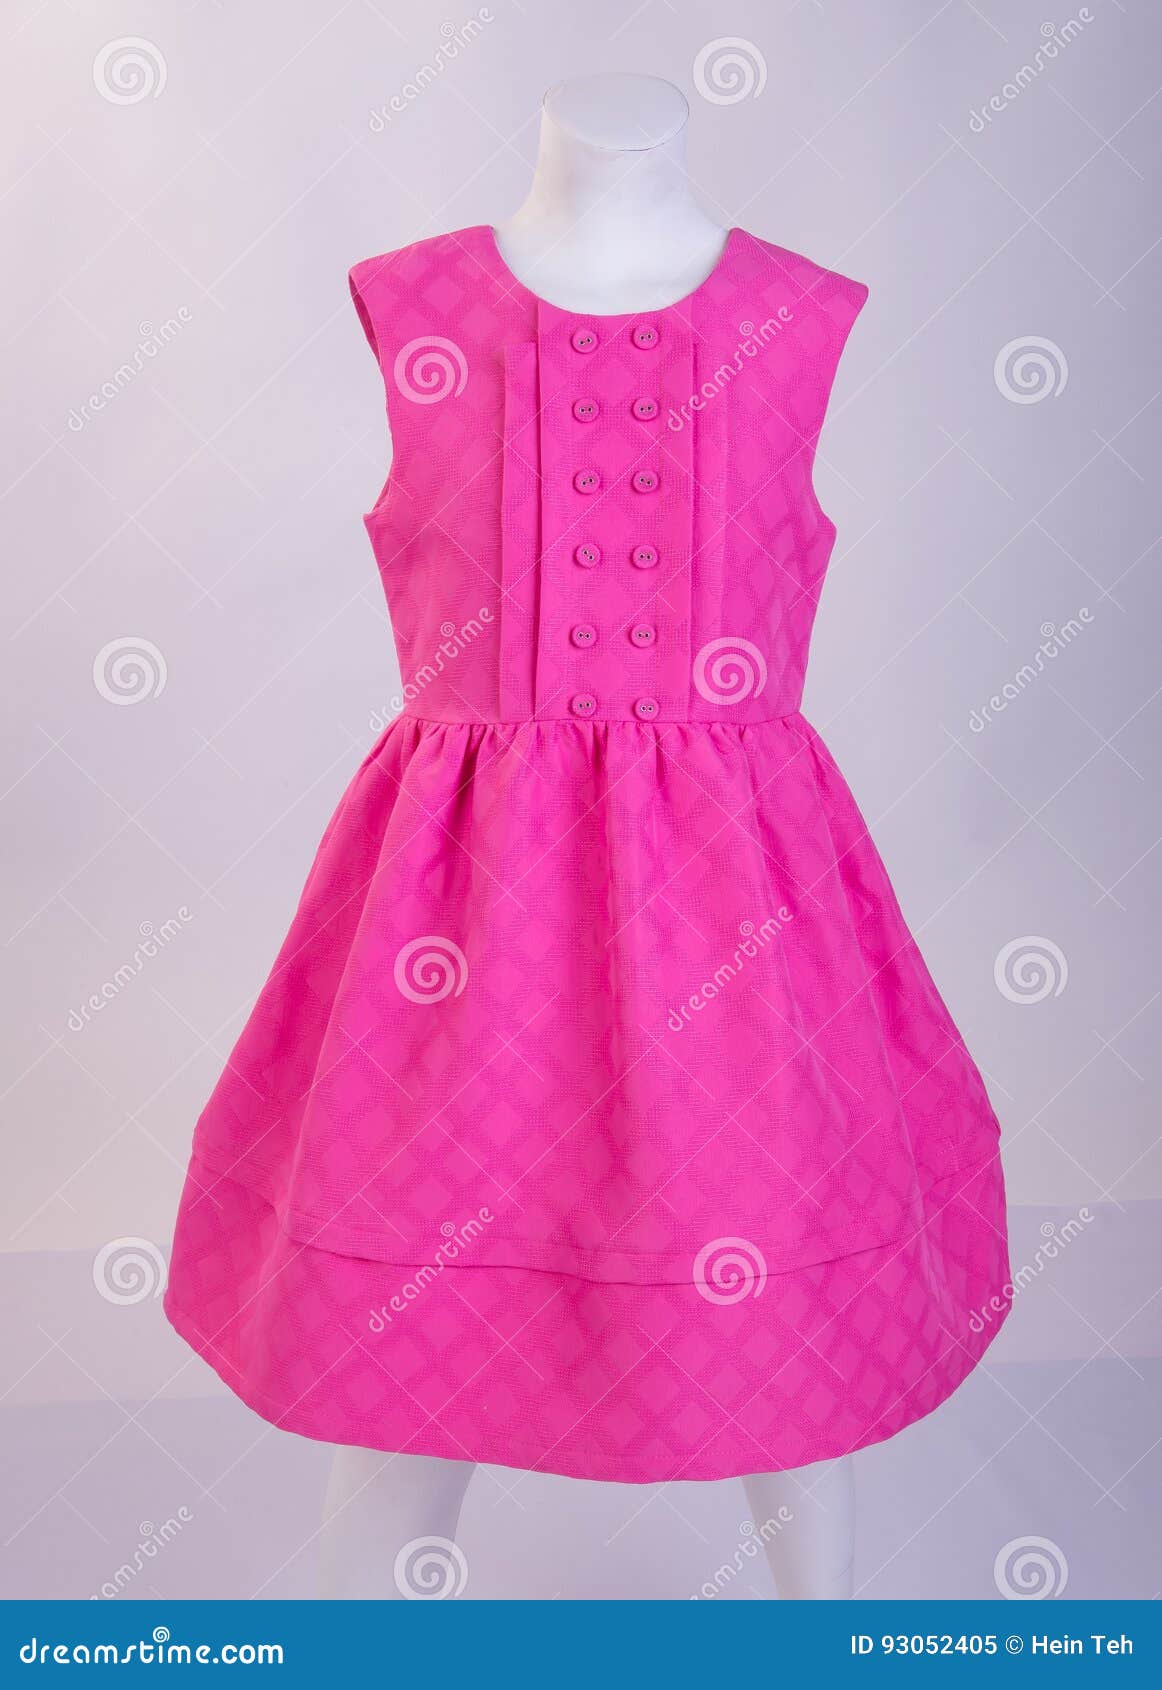 Dress Or Dress For Girl On A Background. Stock Image - Image of ...